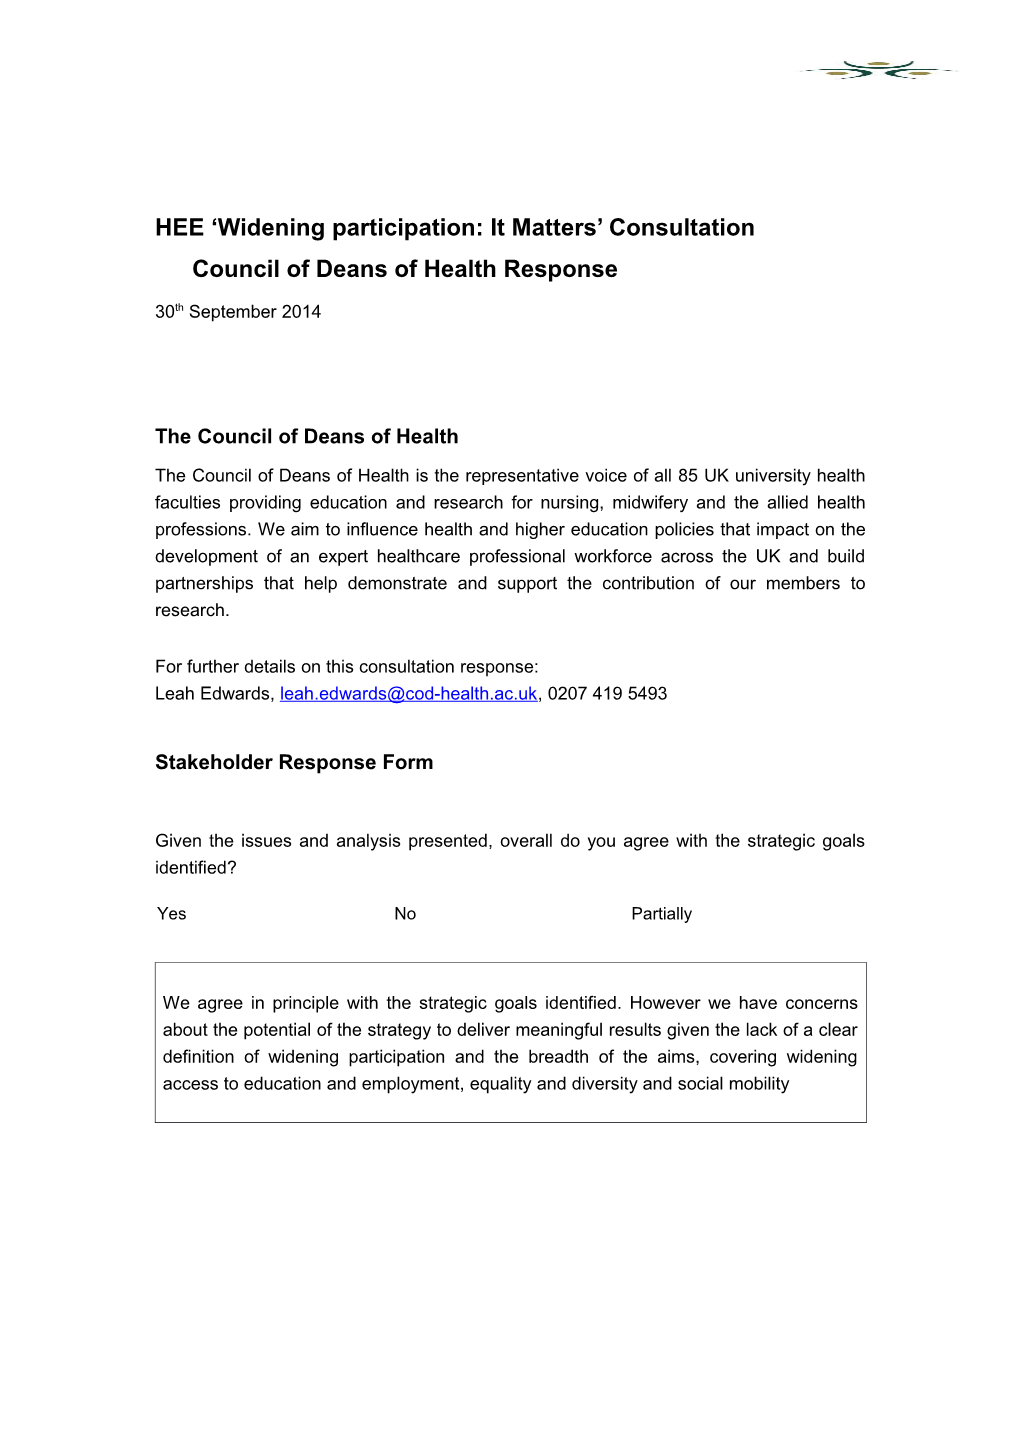 HEE Widening Participation: It Matters Consultationcouncil of Deans of Health Response